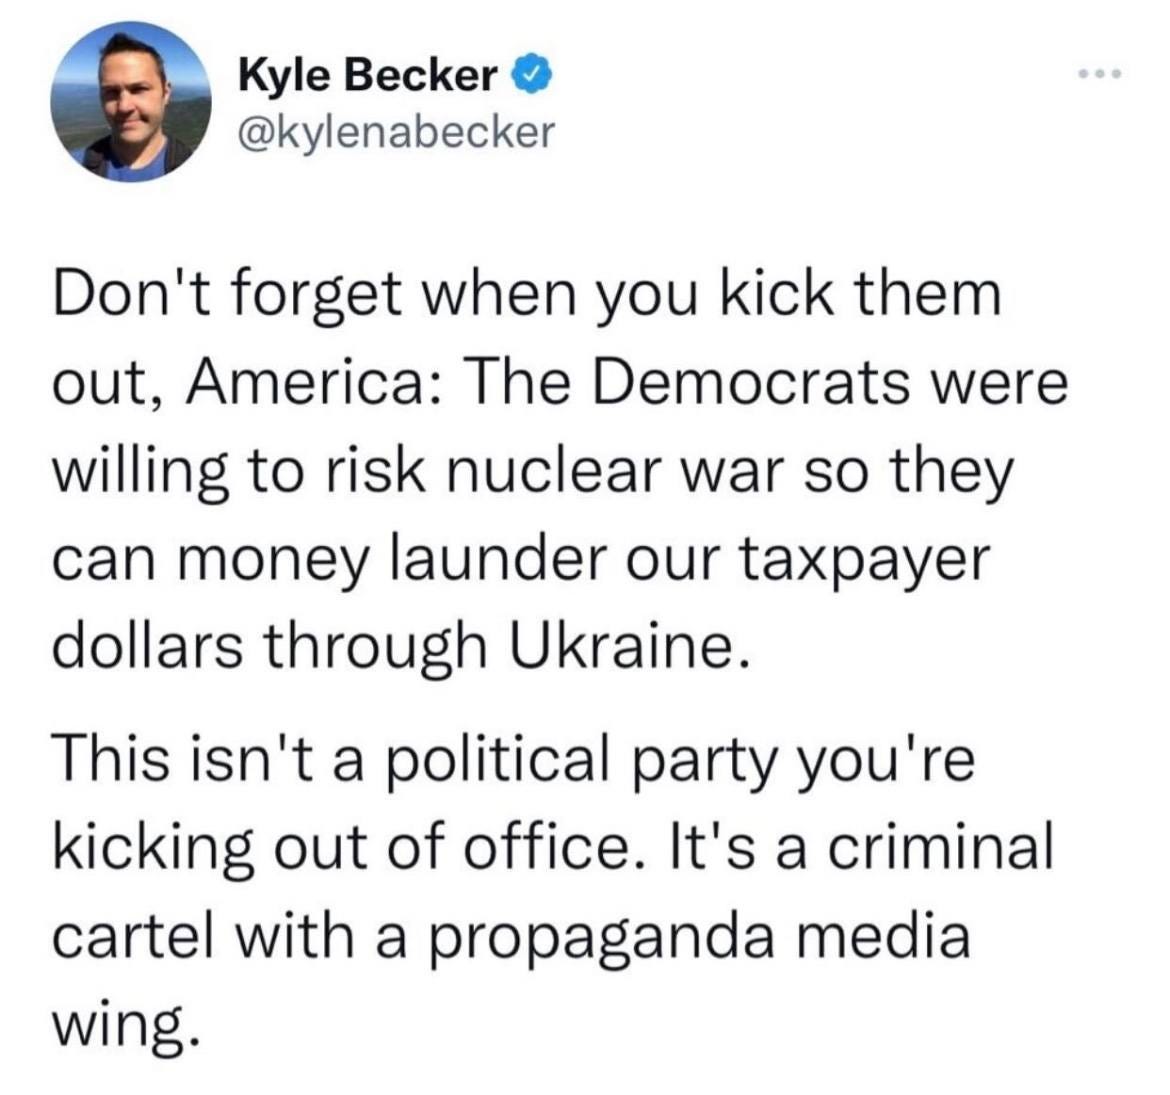 May be a Twitter screenshot of 1 person and text that says 'Kyle Becker @kylenabecker Don't forget when you kick them out, America: The Democrats were willing to risk nuclear war so they can money launder our taxpayer dollars through Ukraine. This isn't a political party you're kicking out of office. It's a criminal cartel with a propaganda media wing.'